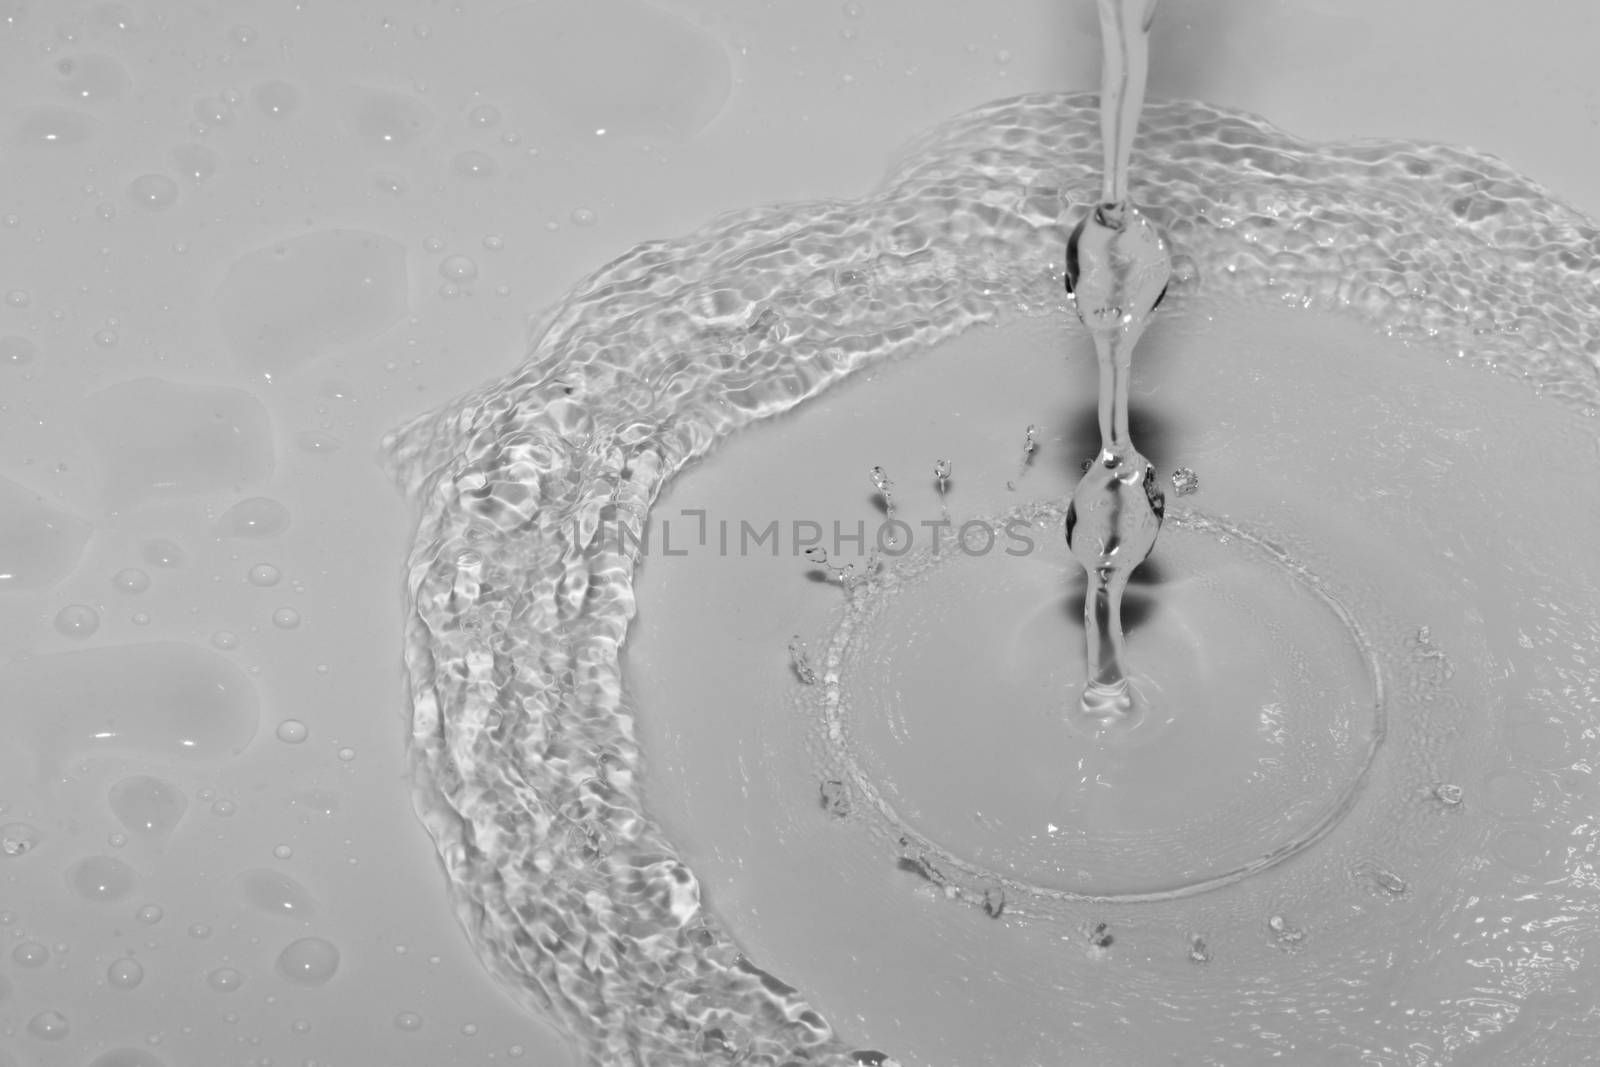 A stream of water splashing and making ripples in a white sink.